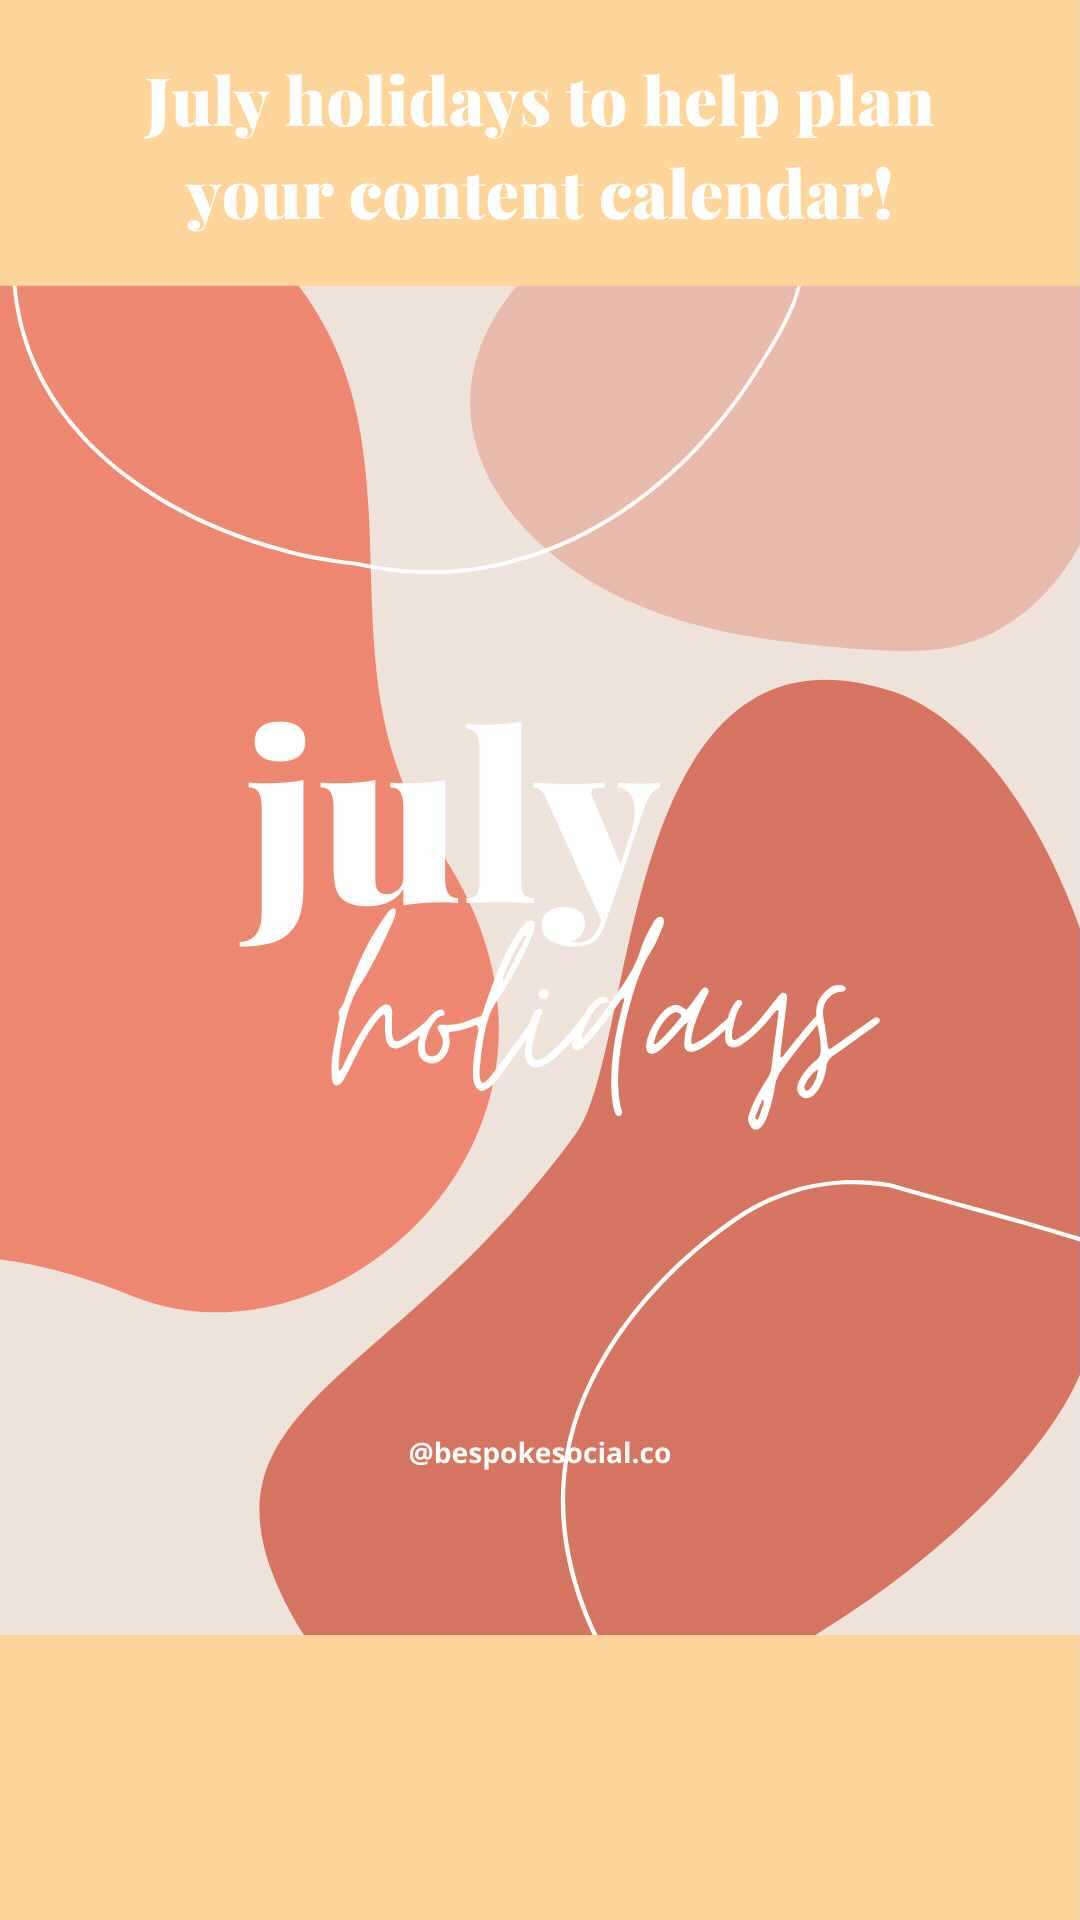 July is almost here!

I know, I can’t believe it either!😱 But that means it’s time to create some new content!

Here is a list of July holidays you can incorporate into your posts to add some fun and creativity!

7/4 Independence Day
7/5 bikini day
7/6 international kissing day
7/7 dive bar day/ global forgiveness 
7/9 sugar cookie day
7/10 kitten day/pina colada day
7/11 cheer up the lonely/mojito day
7/12 simplicity day
7/13 French fry day
7/14 mac and cheese day
7/15 give something away day
7/17 world emoji day
7/18 ice cream day
7/19 national daiquiri day
7/21 junk food day/be somebody day
7/22 hammock day
7/24 tequila day
7/25 wine and cheese day / parent’s day
7/26 disability Independence Day
7/27 love is kind day/scotch day/new jersey day
7/28 waterpark day
7/29 lipstick day
7/30 international day of friendship
7/31 avocado day

Be sure to add some relevant hashtags to help increase your reach!😉
.
.
.
.
.
Source: @natdaycal 
#contentcreator #contentmarketing #contentmarketingtips #contentmarketingstrategy #contentcreation #contentstrategy #socialmediastrategist #contentplanner #workfromphone #contentideas #socialmediaconsultant #socialmediacoach #socialmediaconsulting #savvybusinessowner #businessstrategy #entrepreneur #brandstrategy #creativeentrepreneur #marketingtips #summercontent #summertimes #businessstrategy #contentstrategy #contentplan #summertimevibes #contentcalendar #socialmediastrategies #socialmediatips #summerholidayfun